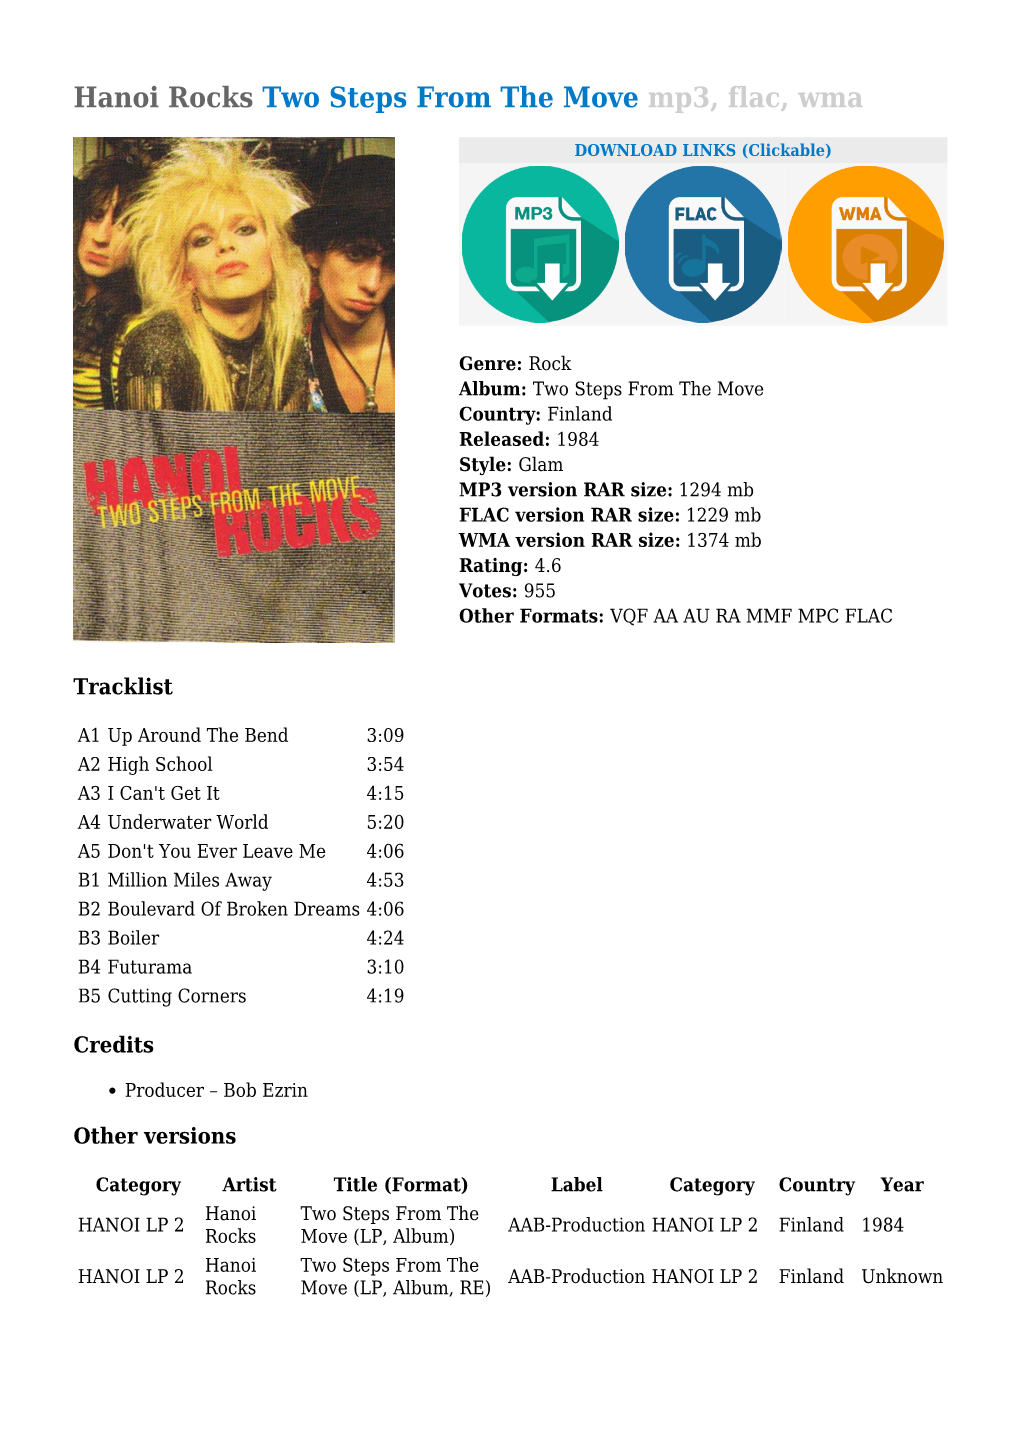 Hanoi Rocks Two Steps from the Move Mp3, Flac, Wma